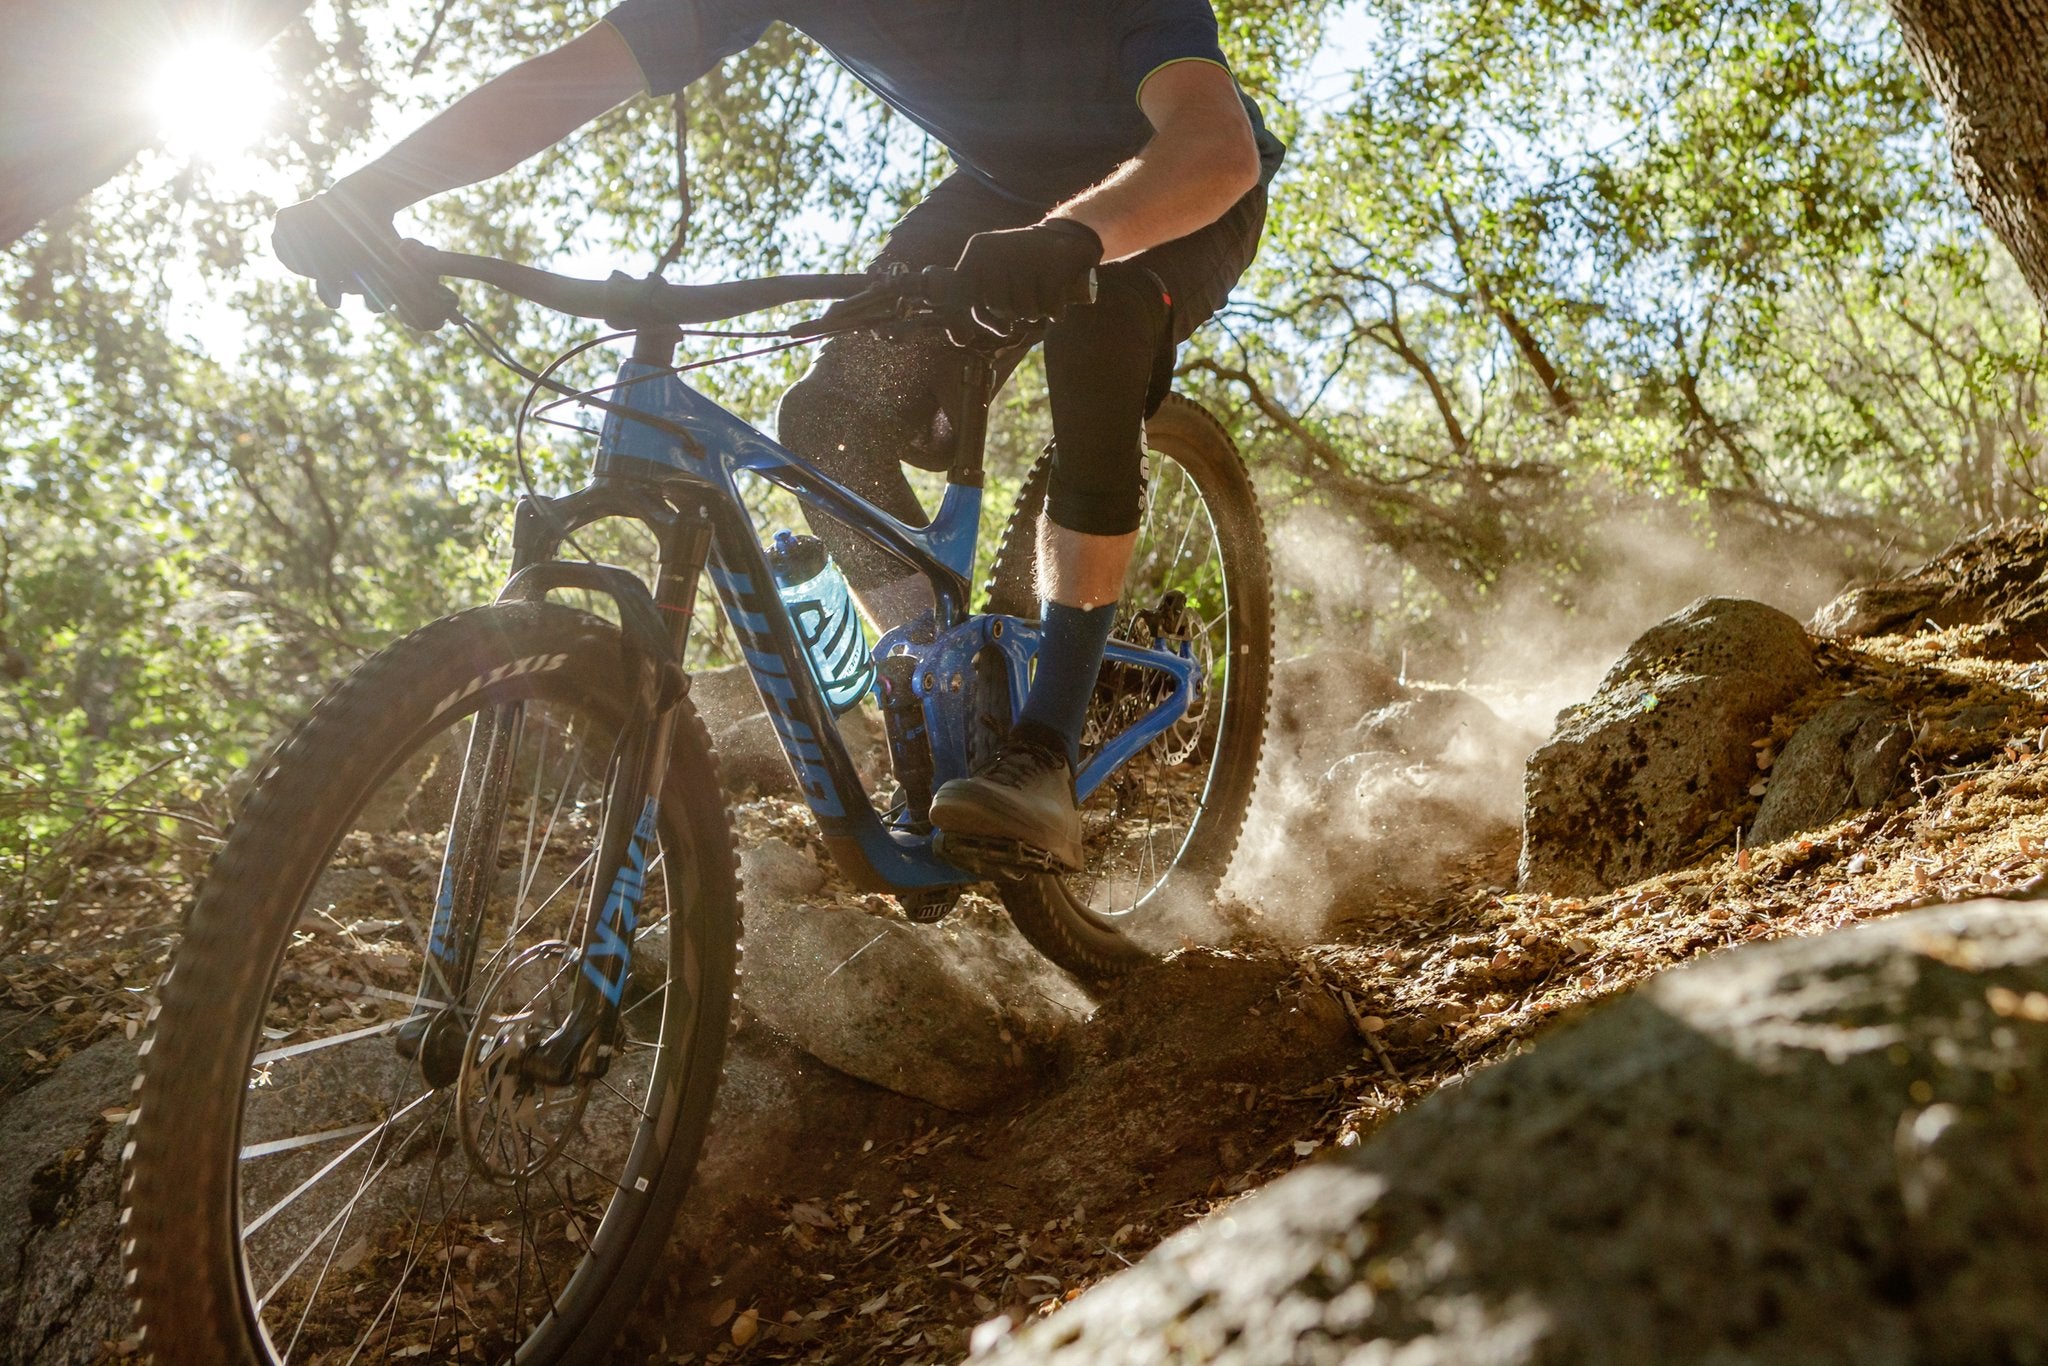 The Best Giant Mountain Bike Buyer’s Guide: Hardtails to Enduro's & Full-Suspension